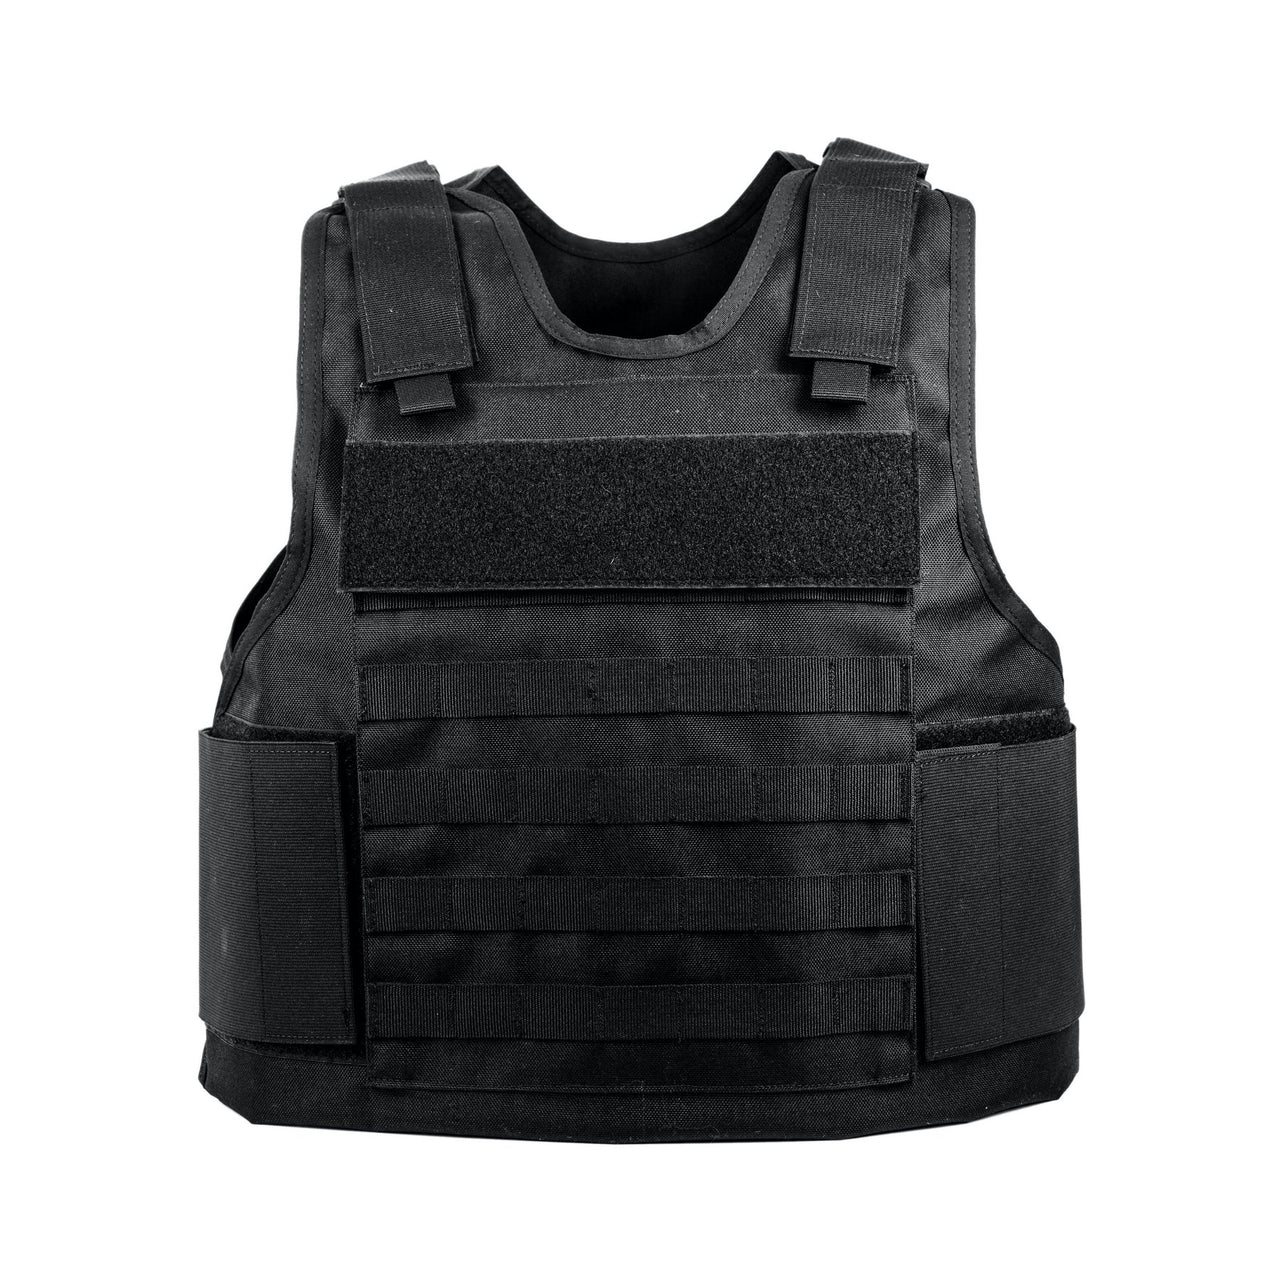 A black Body Armor Direct All Star Tactical Enhanced Multi-Threat Vest on a white background.